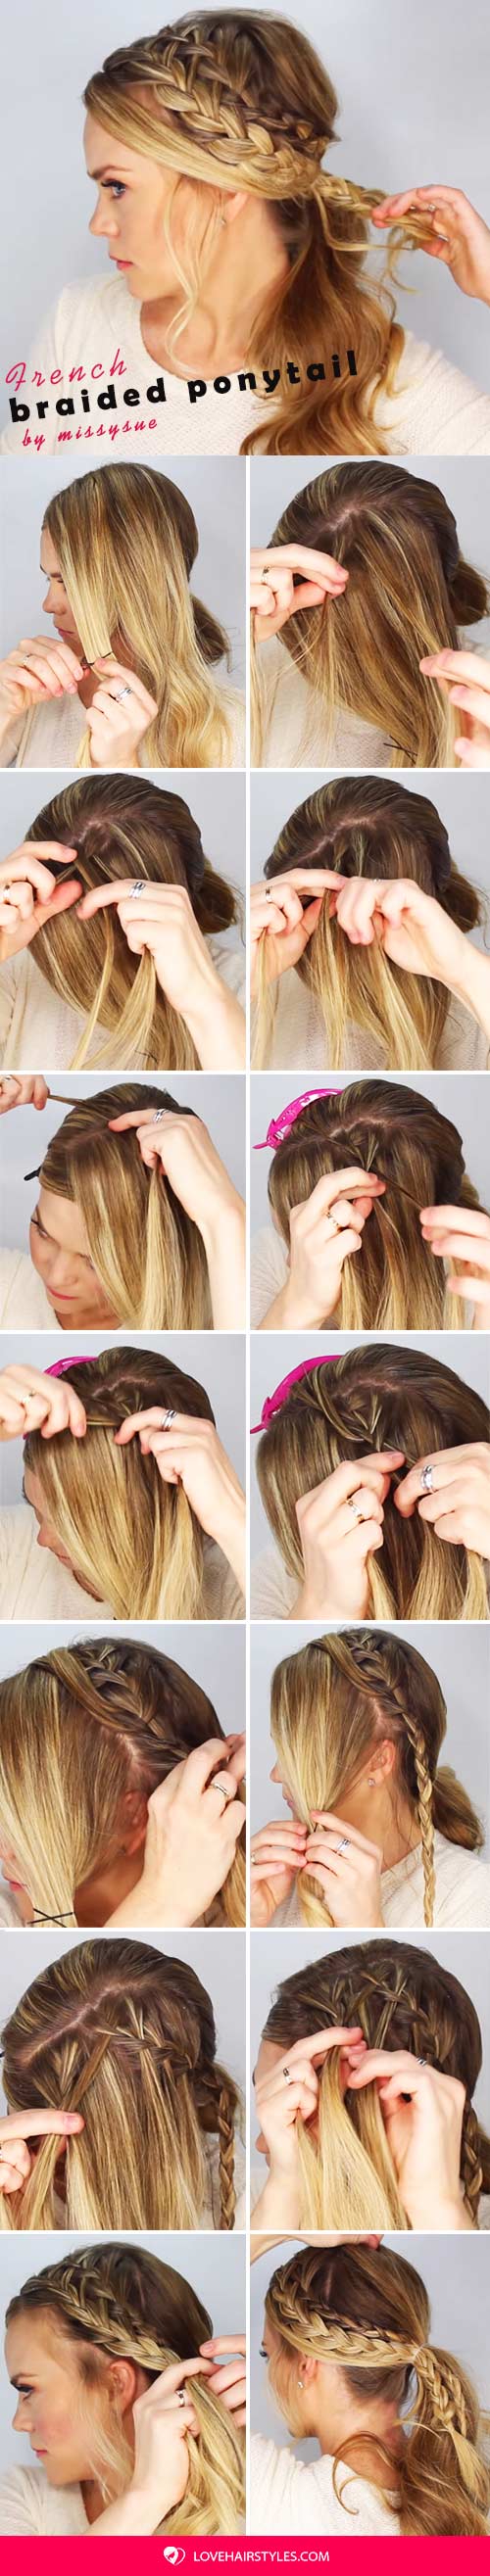 How To Make A Double Braided Ponytail #braids #hairtutorial #ponytail